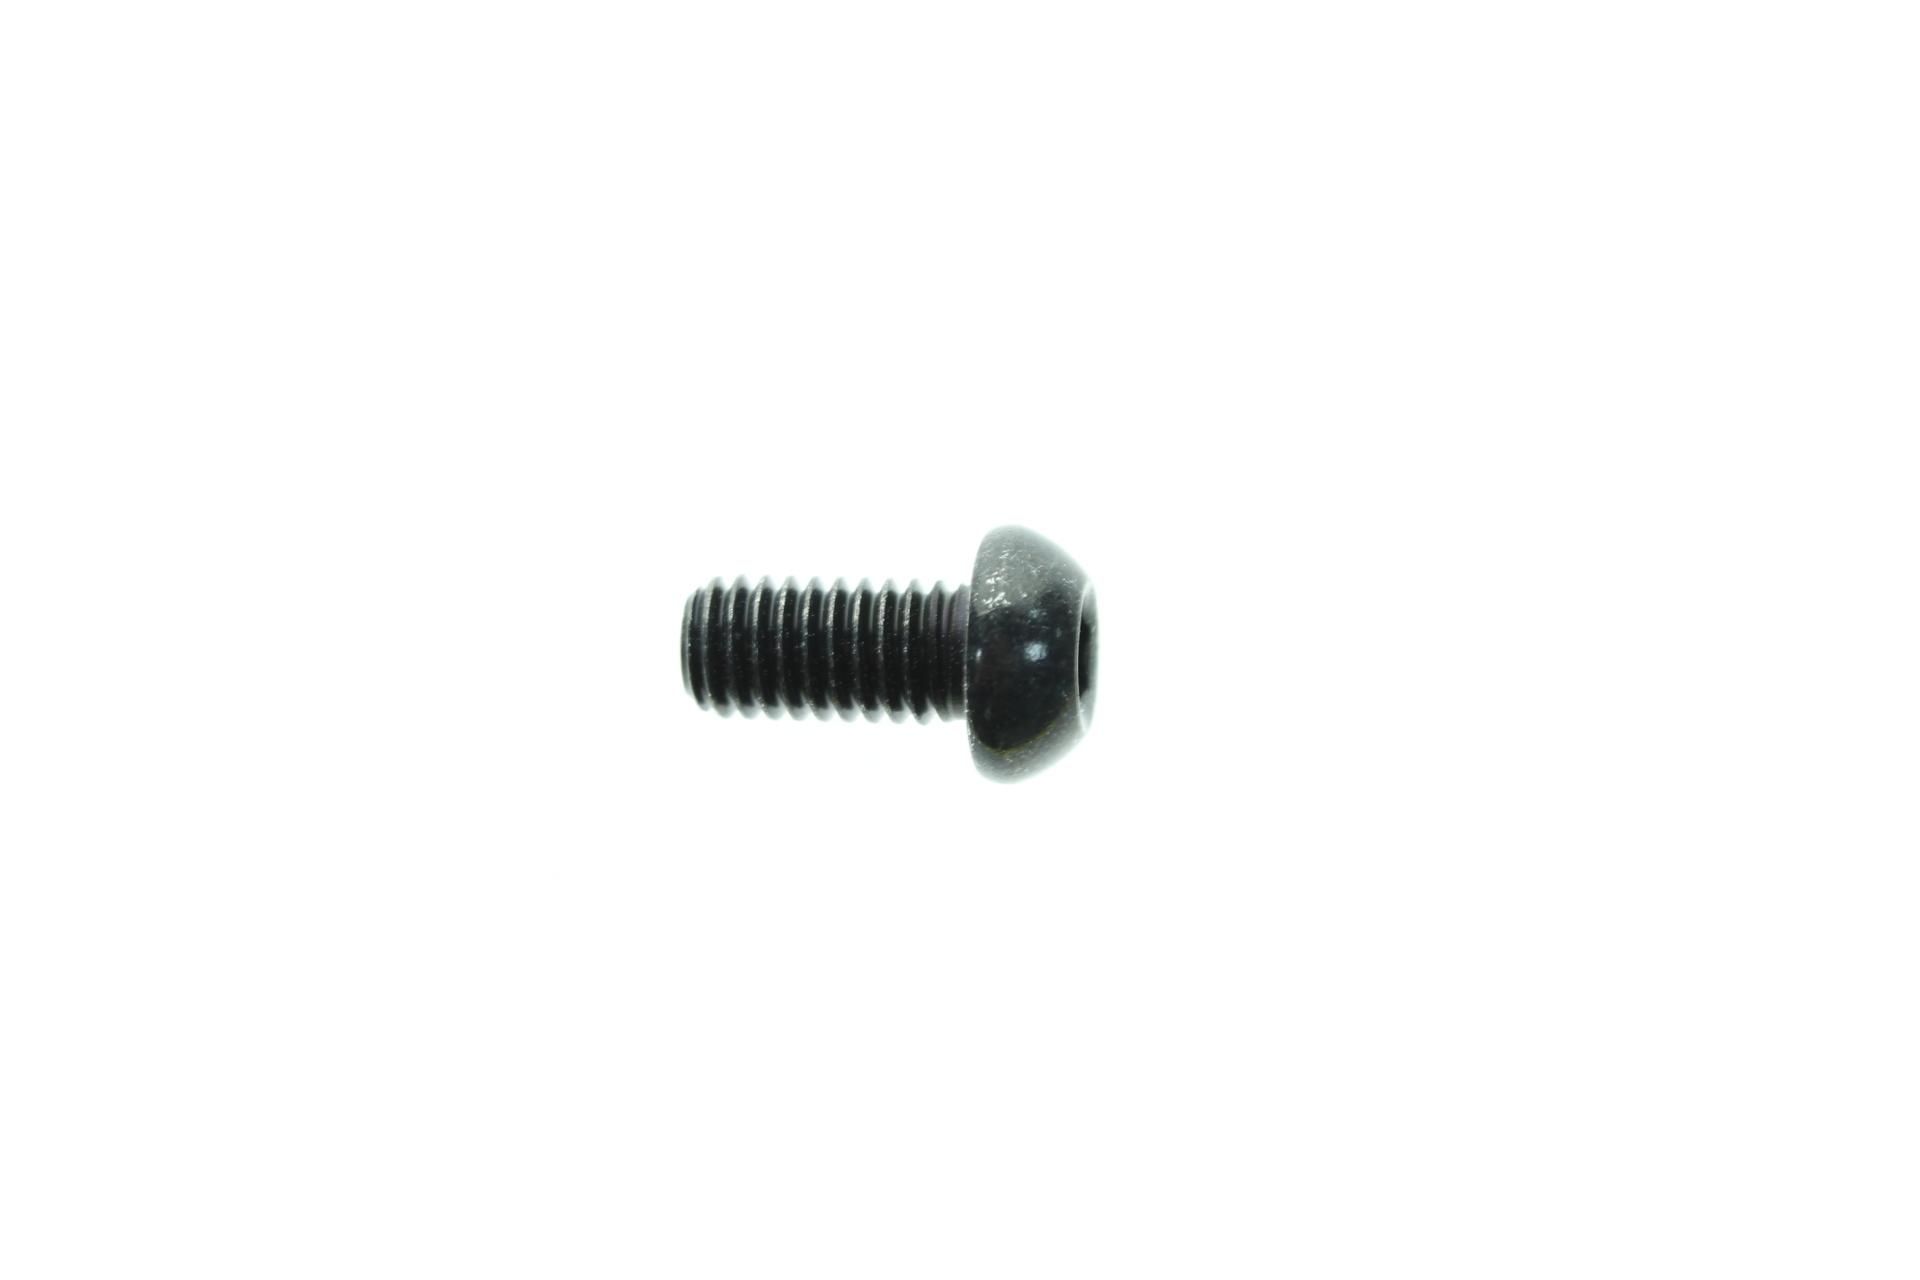 90149-06233-00 Superseded by 92017-06012-00 - SCREW(3GG)